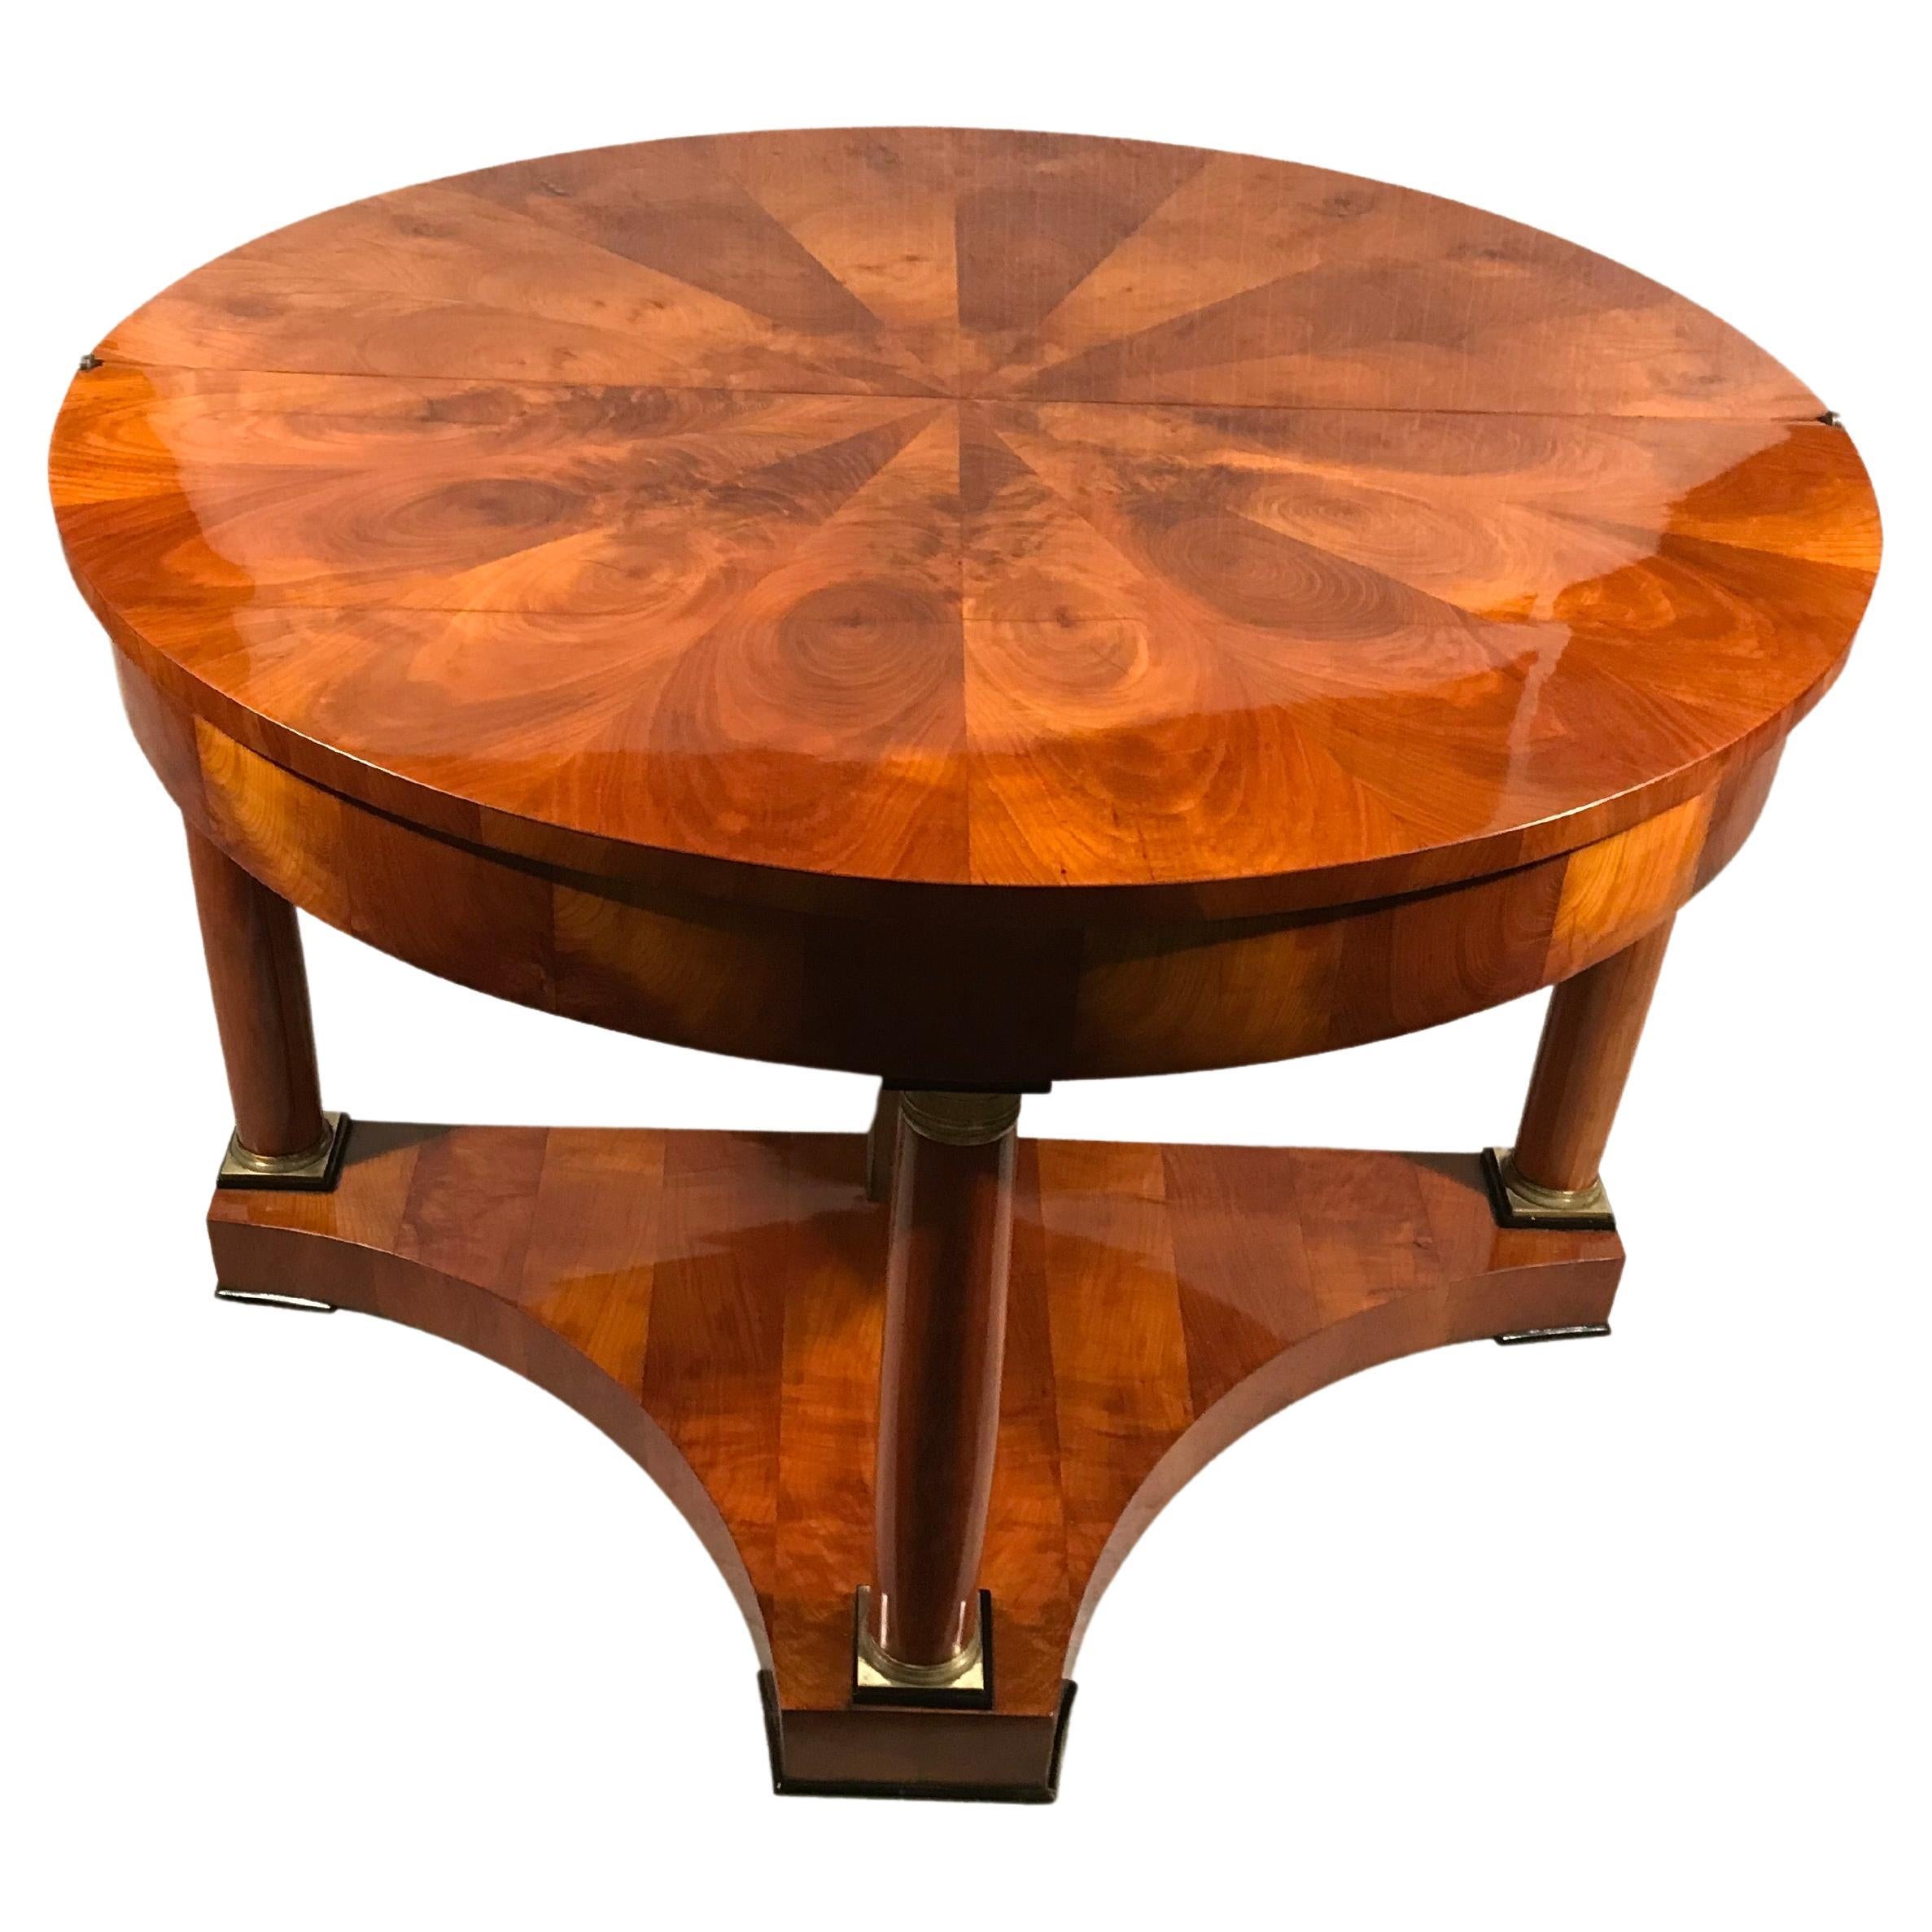 Biedermeier Demilune Table, 1815-20
Elevate your space with our exquisite Biedermeier demilune table, celebrated for its timeless elegance and distinctive design.

Standing on four column legs featuring brass capitals and bases, this table exudes